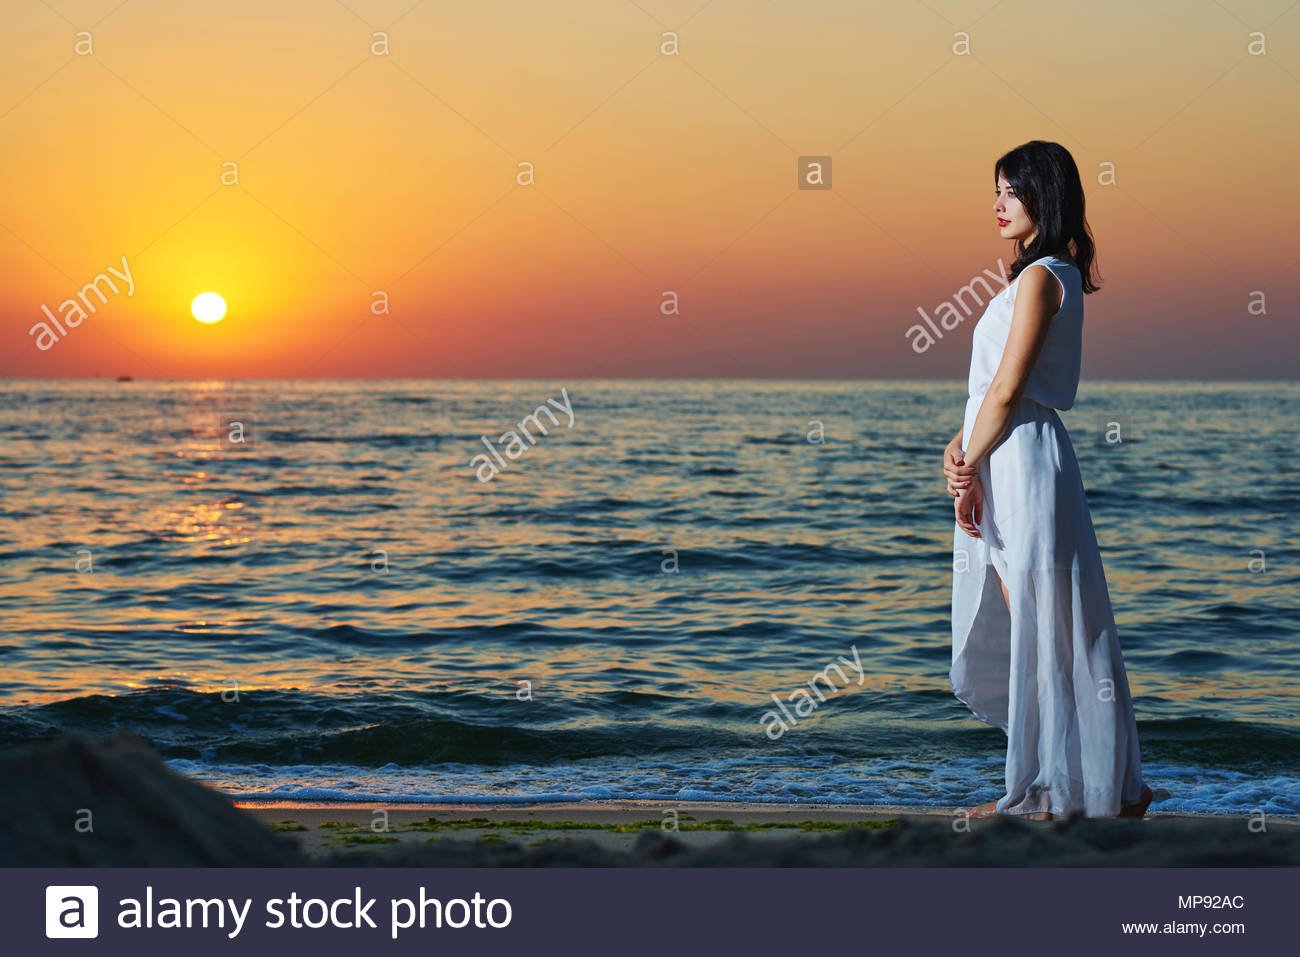 Sideview of young woman in white dress standing on sunsets